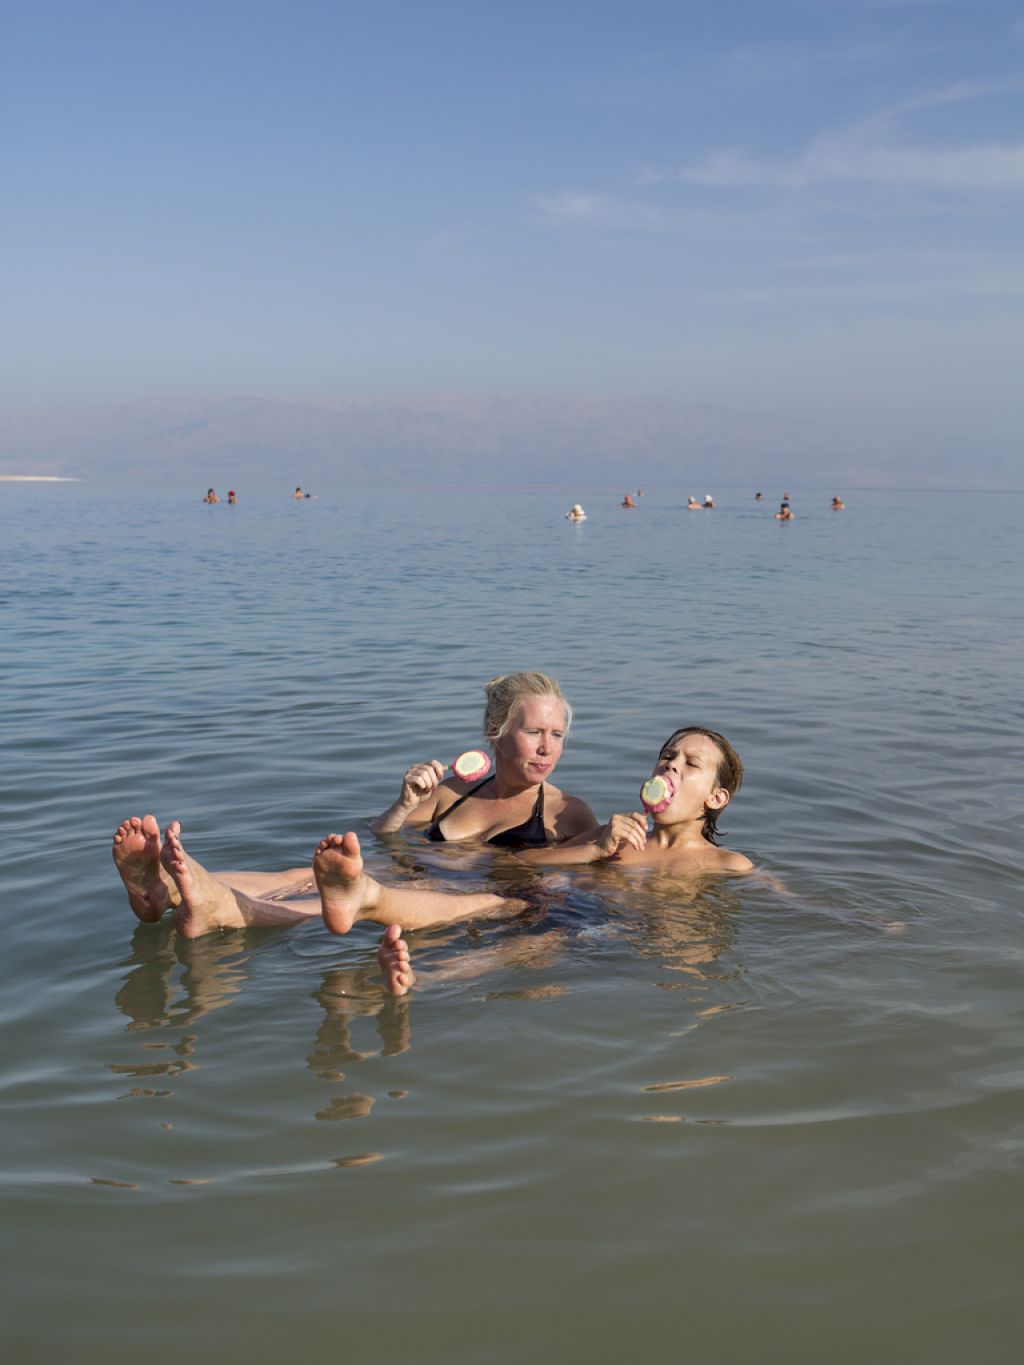 dead sea7 Floating on the Dead Sea by Itamar Grinberg